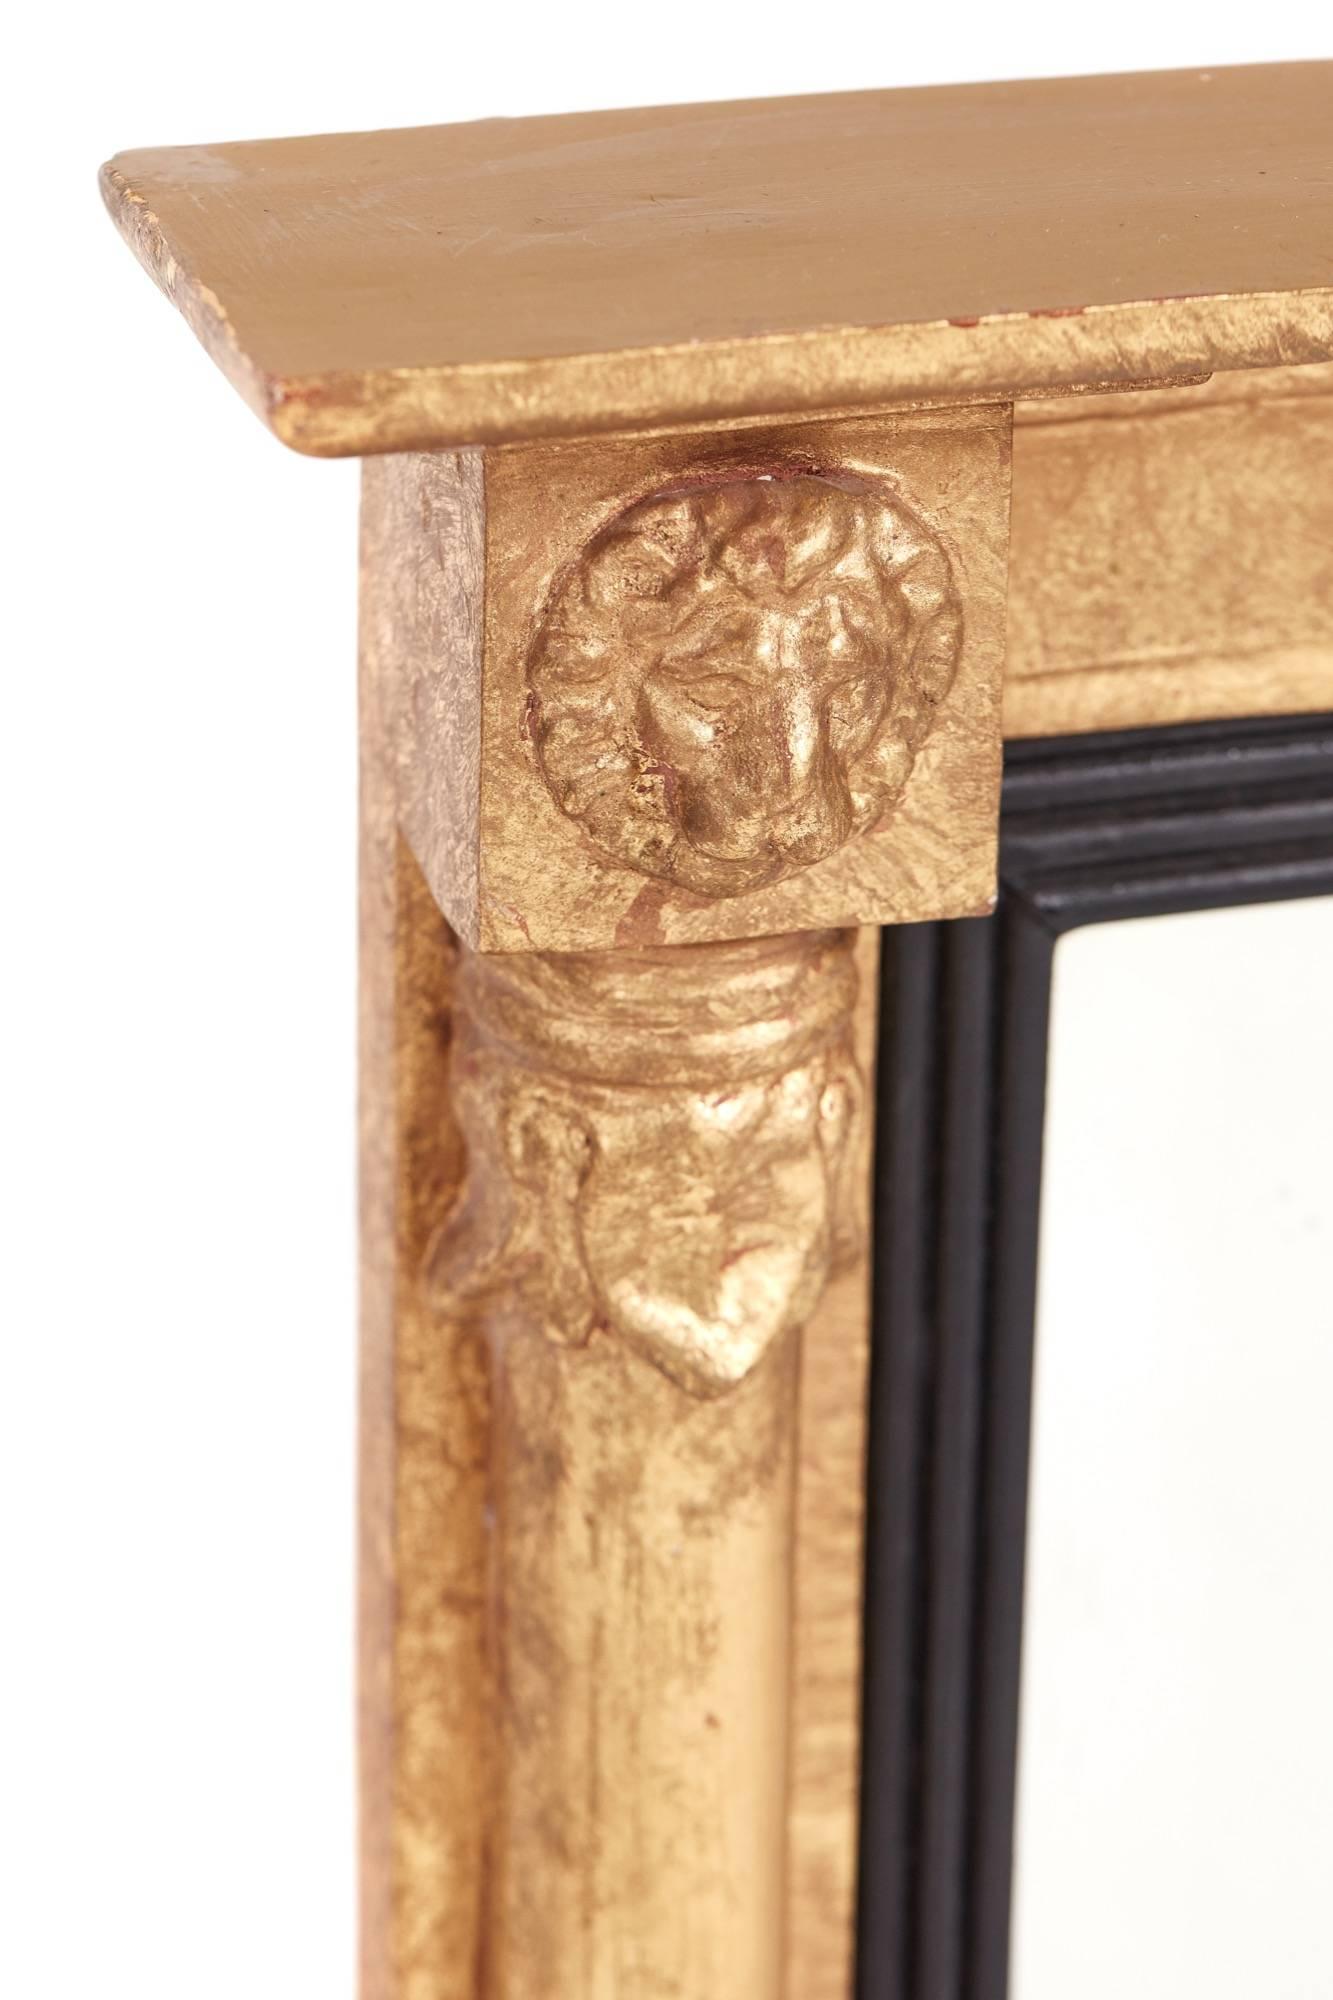 Antique Regency gilt overmantel mirror, gilt frieze with lion head motifs, split columns, ebonized and reeded dividers to the original plate mirror, standing on original ebonized ball feet
Lovely condition.